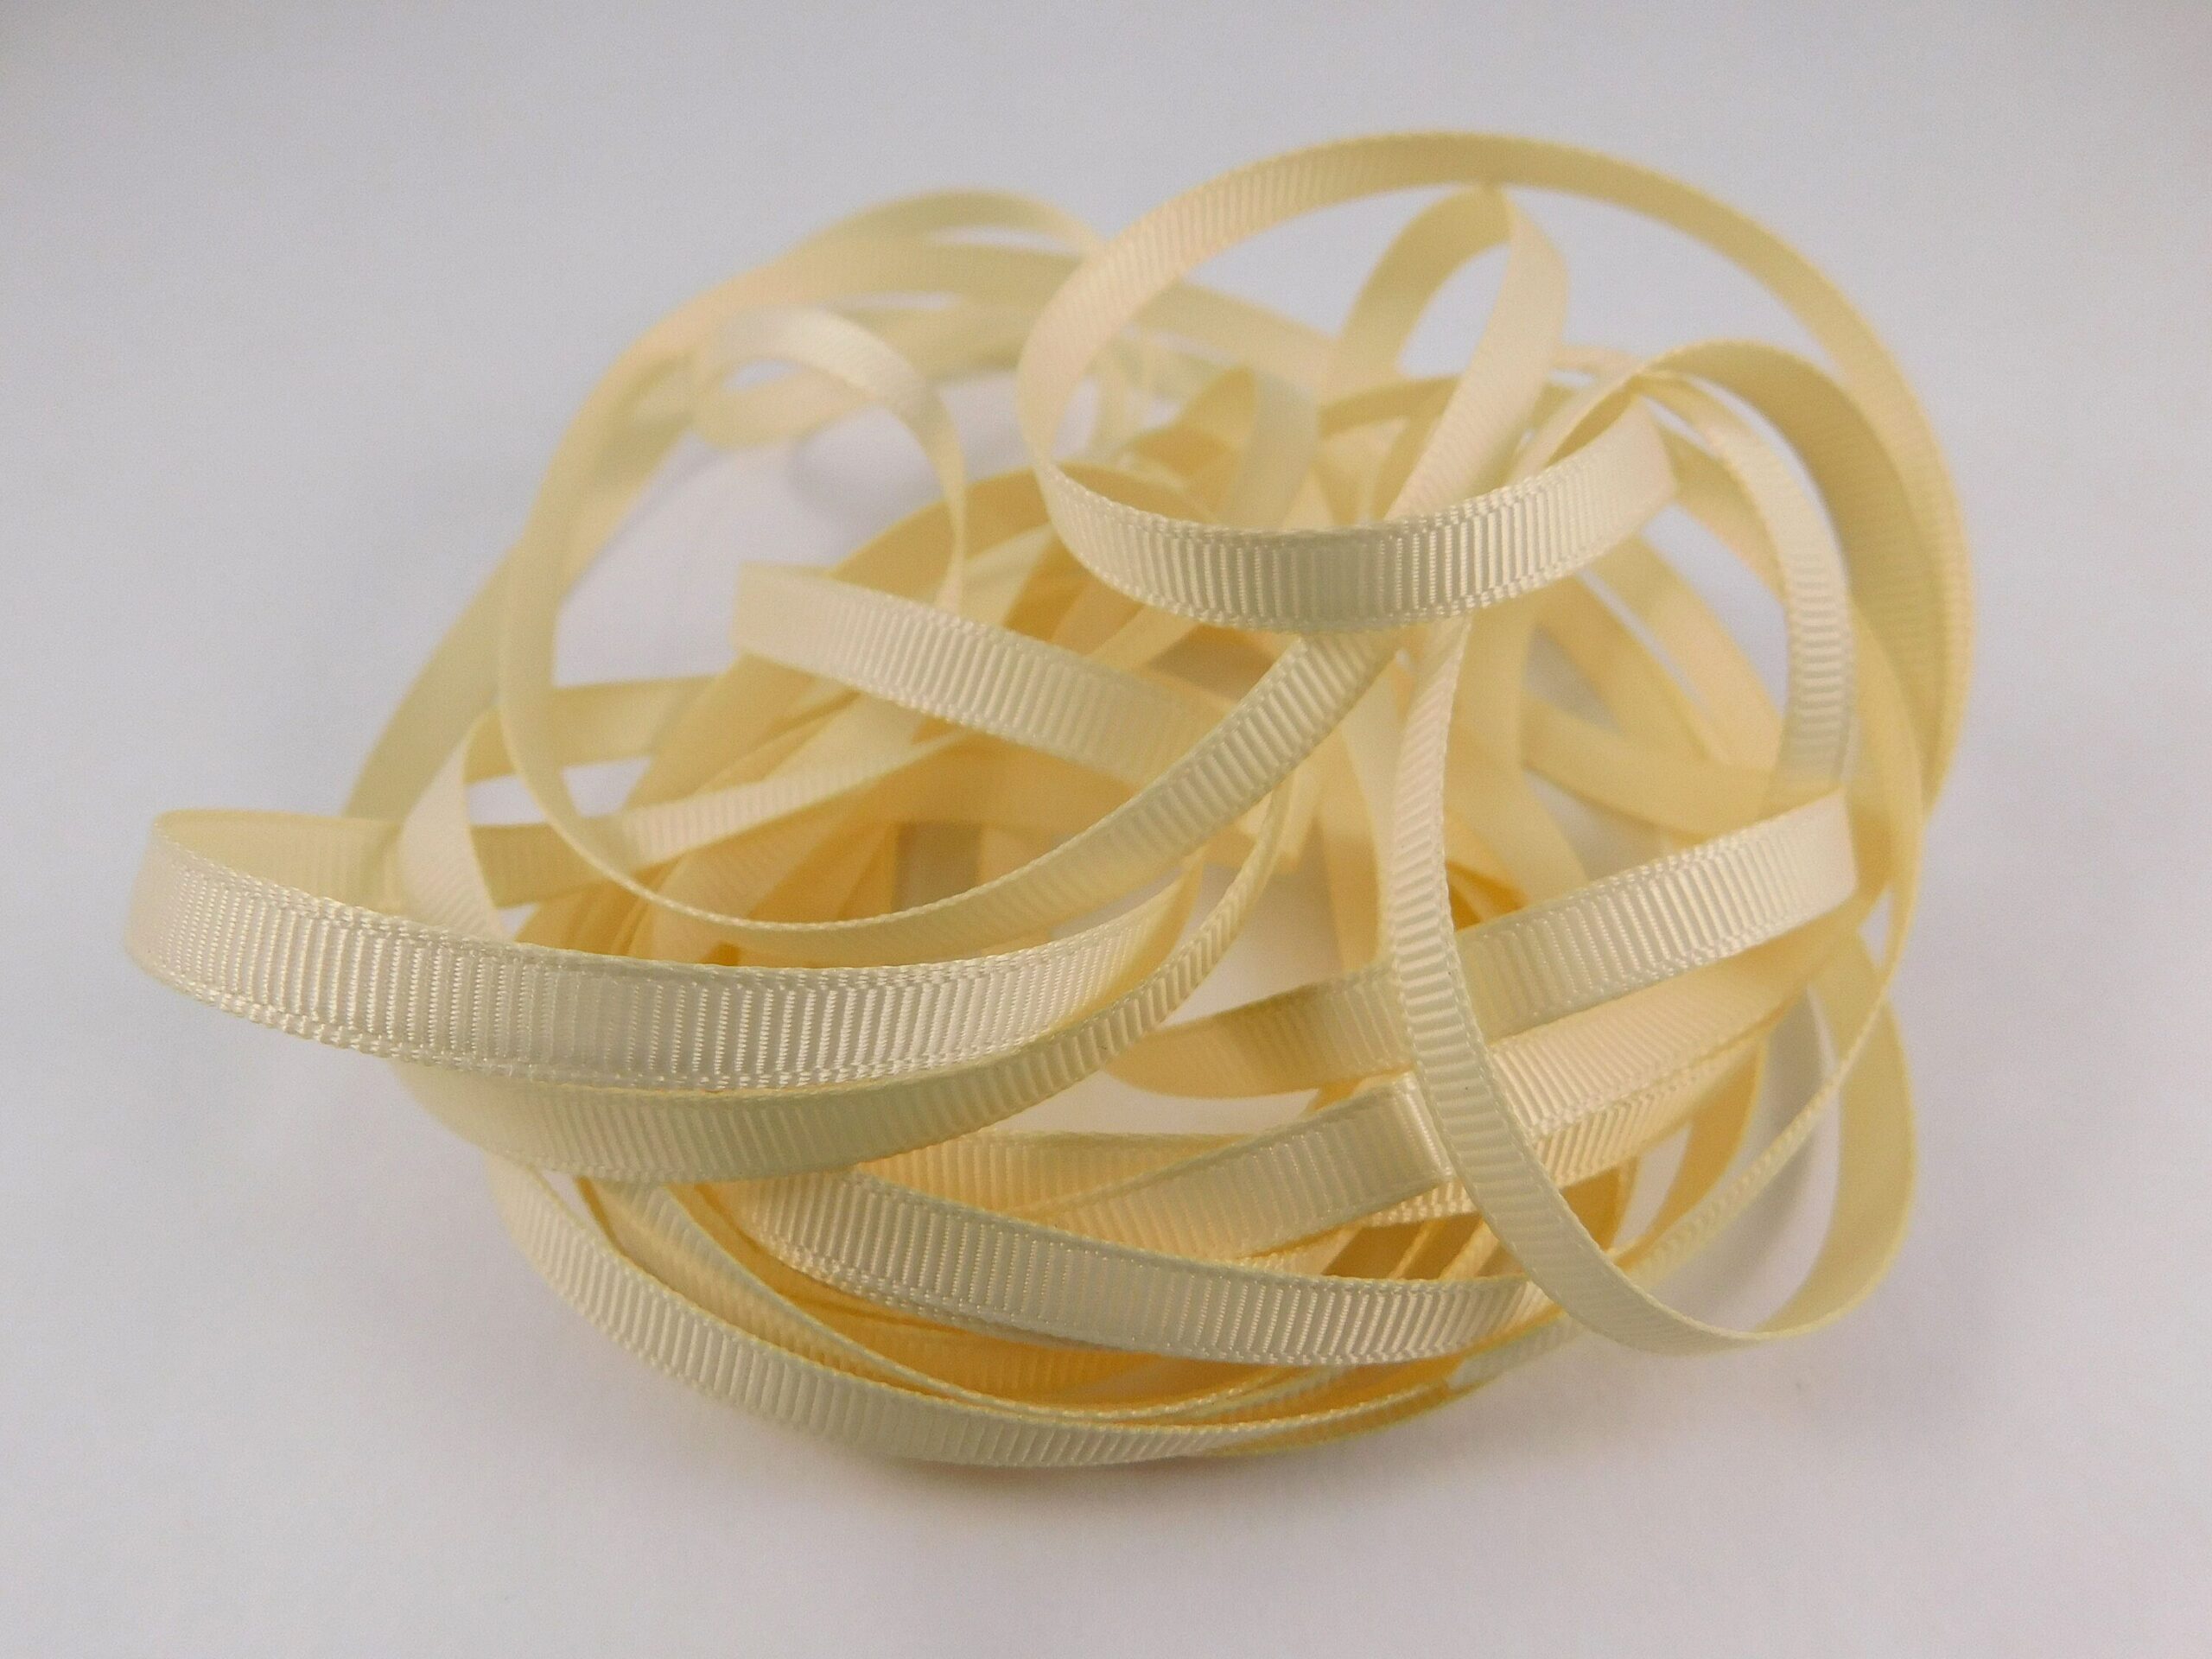 5 Yards Old Gold Yellow Grosgrain Ribbon 1/4 Inch Wide Trim Scrapbooking  Embellishment Sewing Ribbon Supplies Mixed Media Card Making 